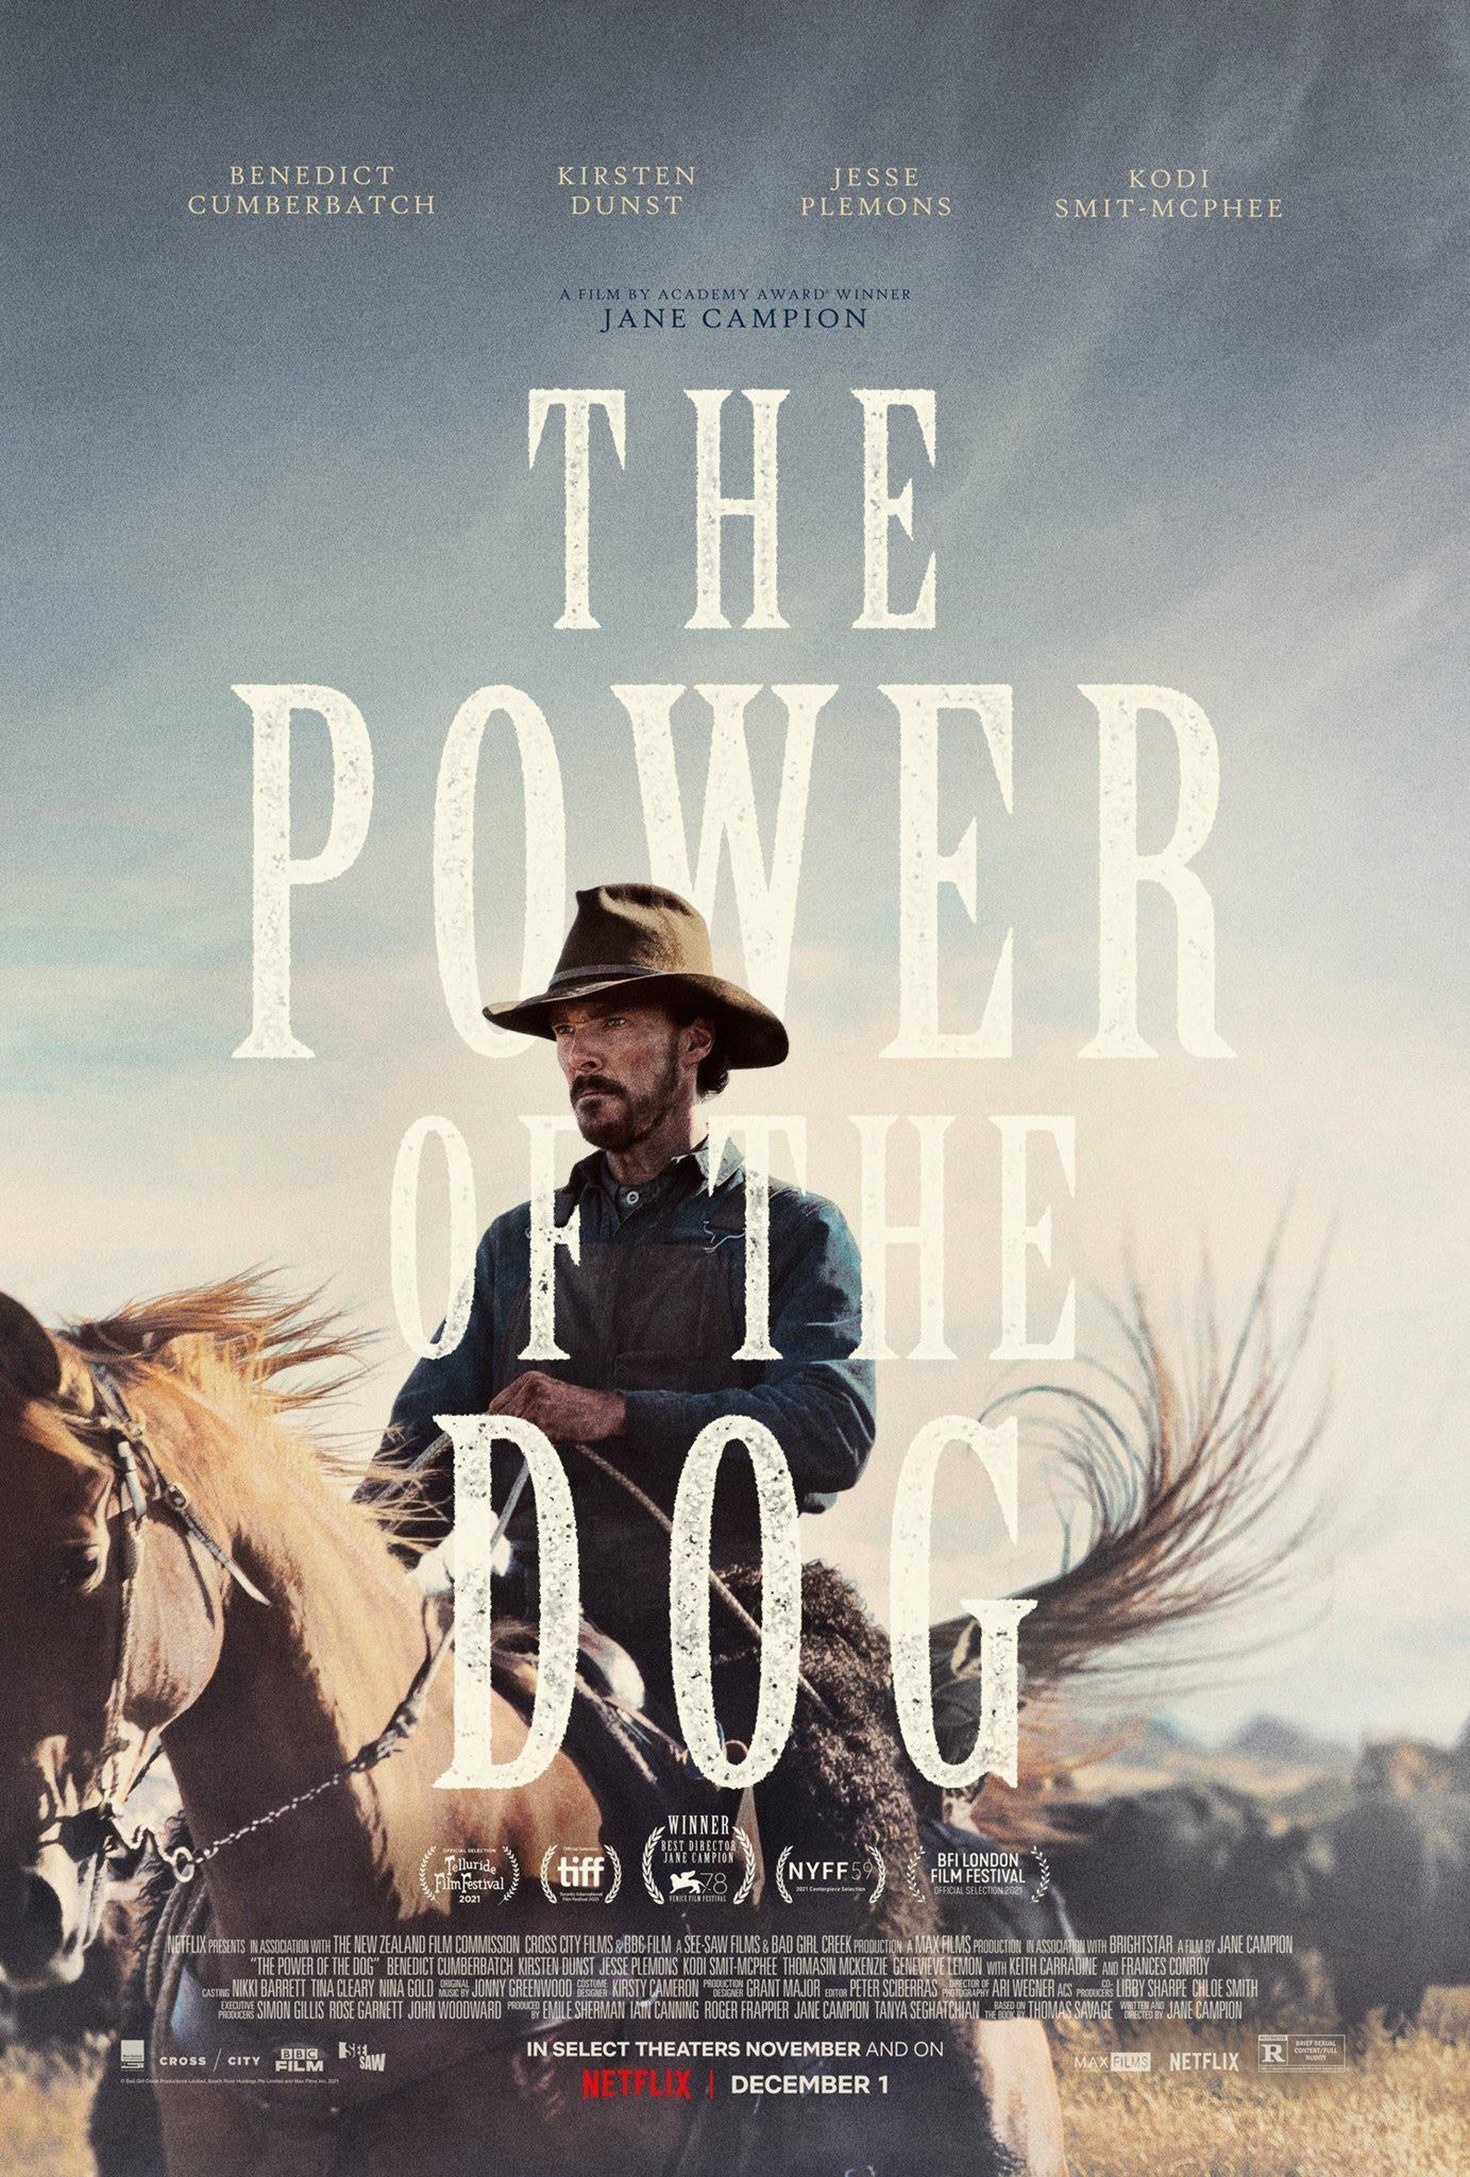 Cumberbatch rides a horse in the poster for The Power of the Dog